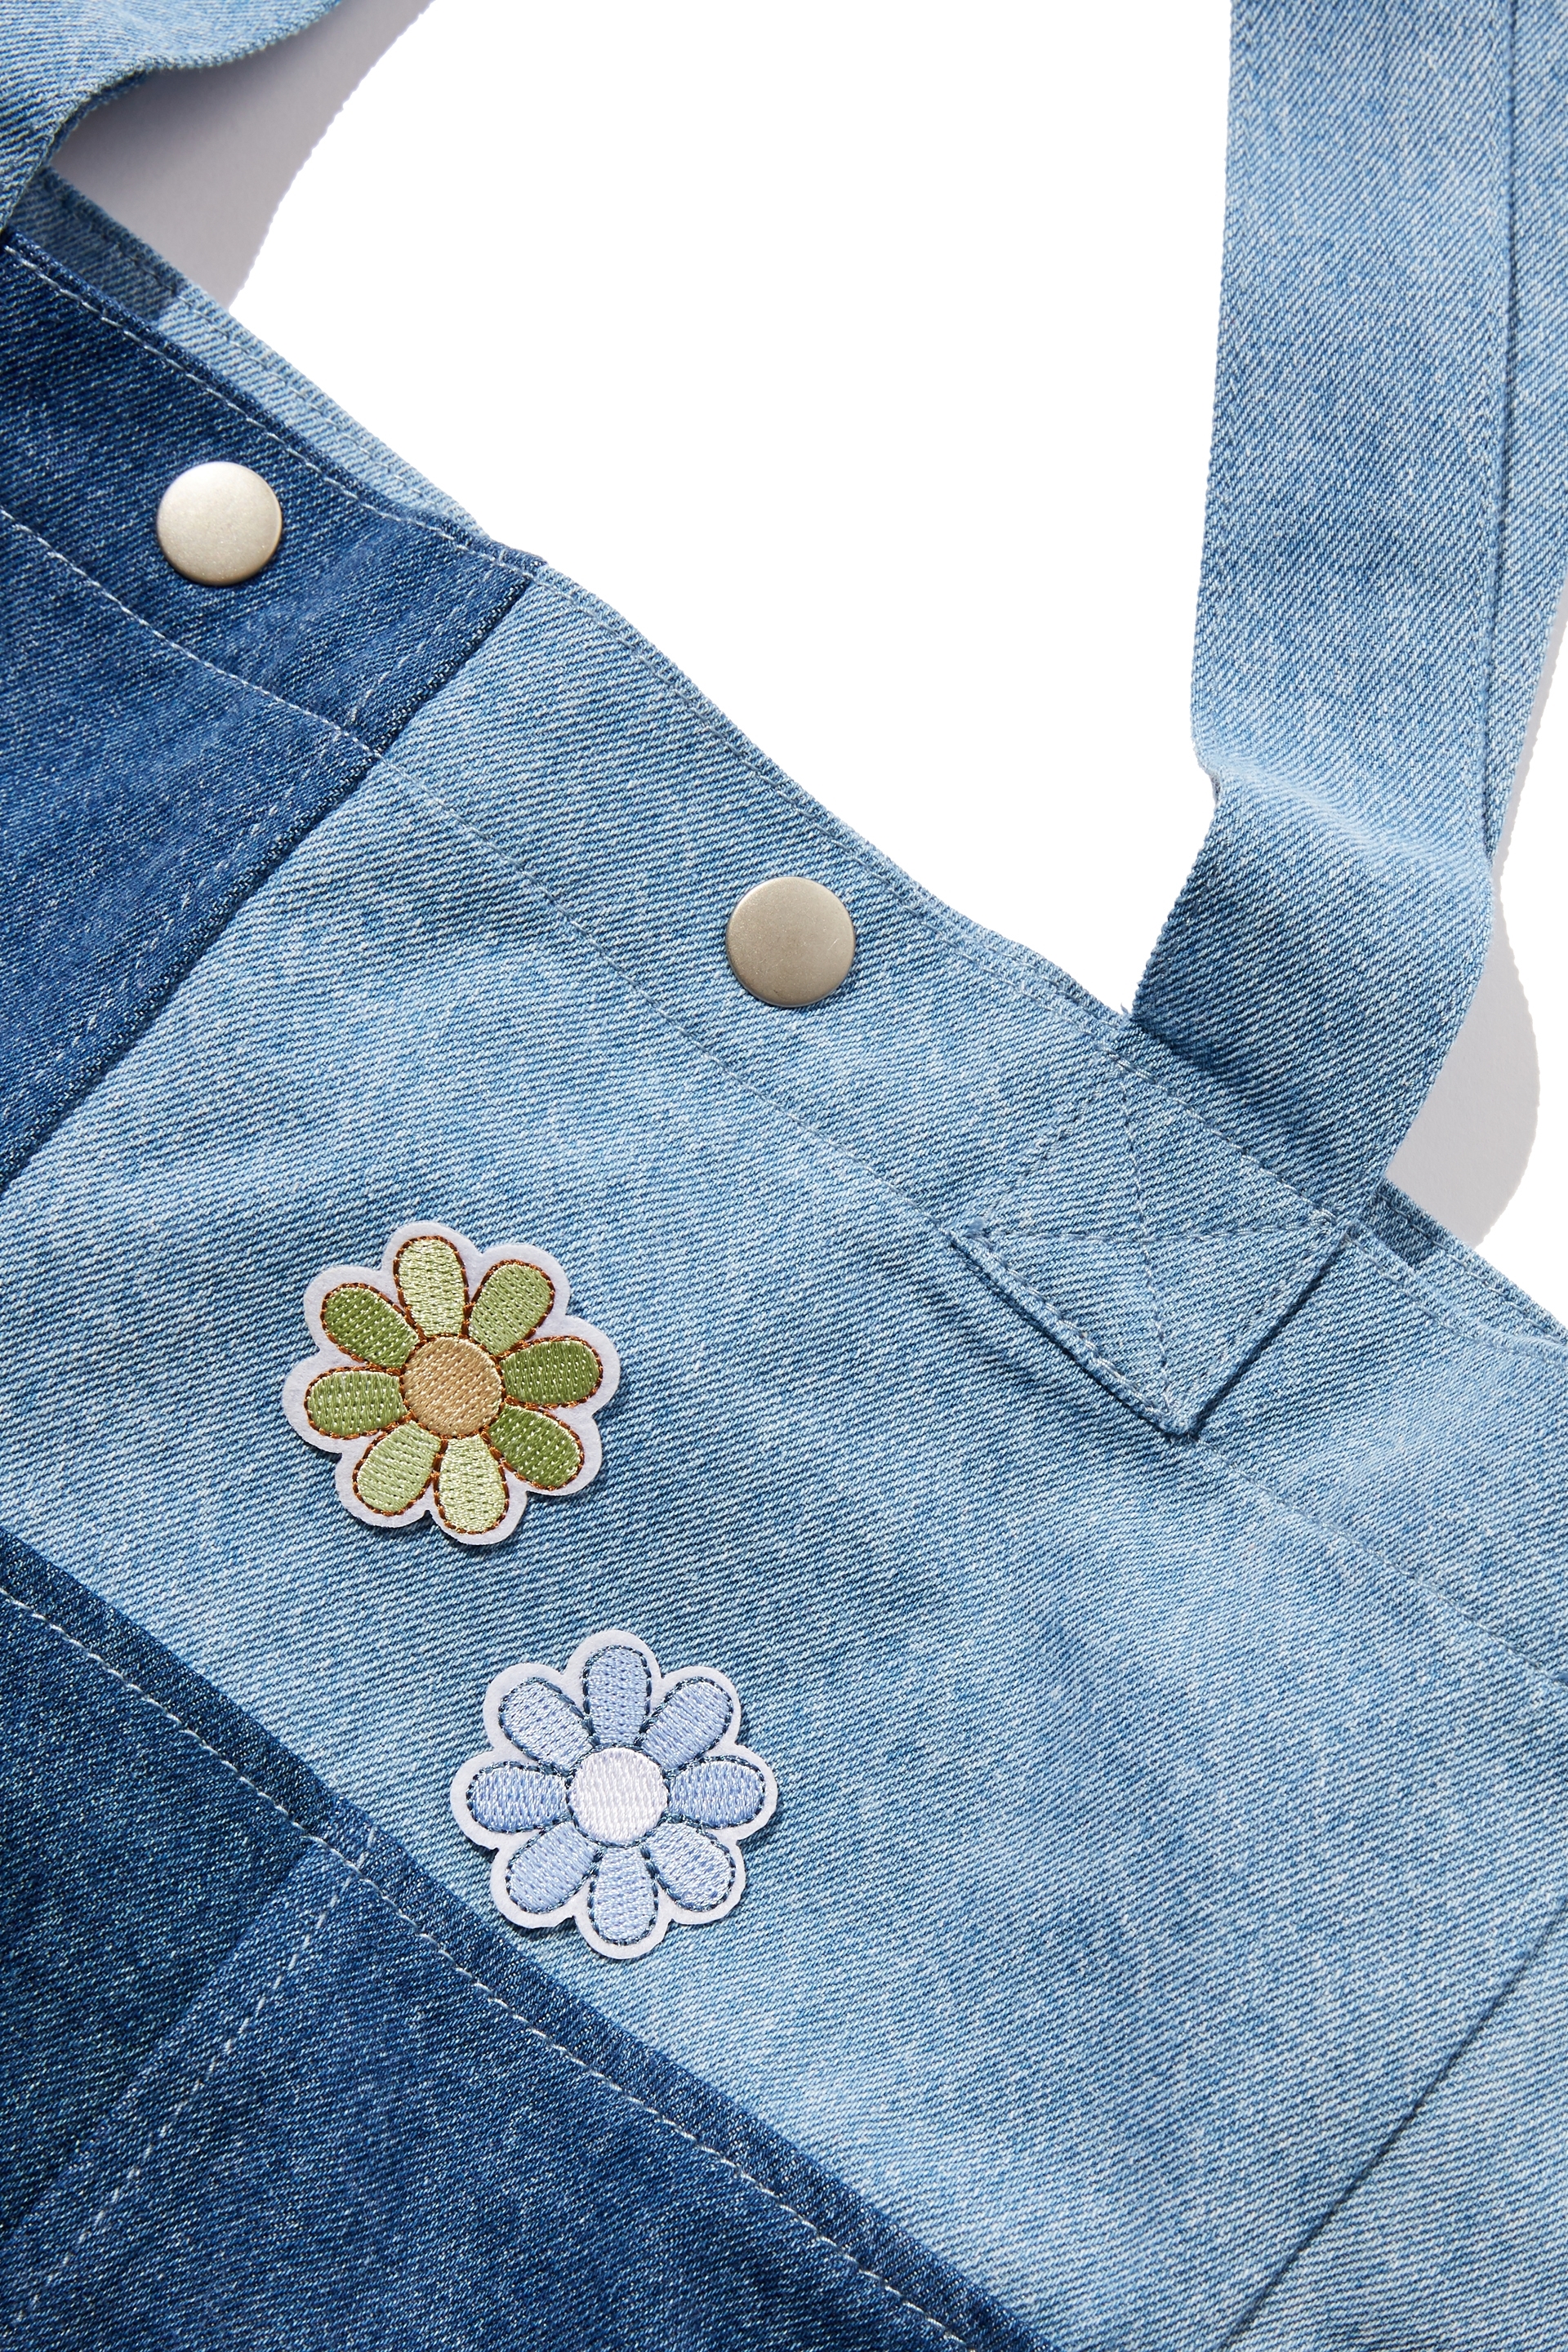 Rubi - 2Pk Embroidered Patches - Blue & green daisy